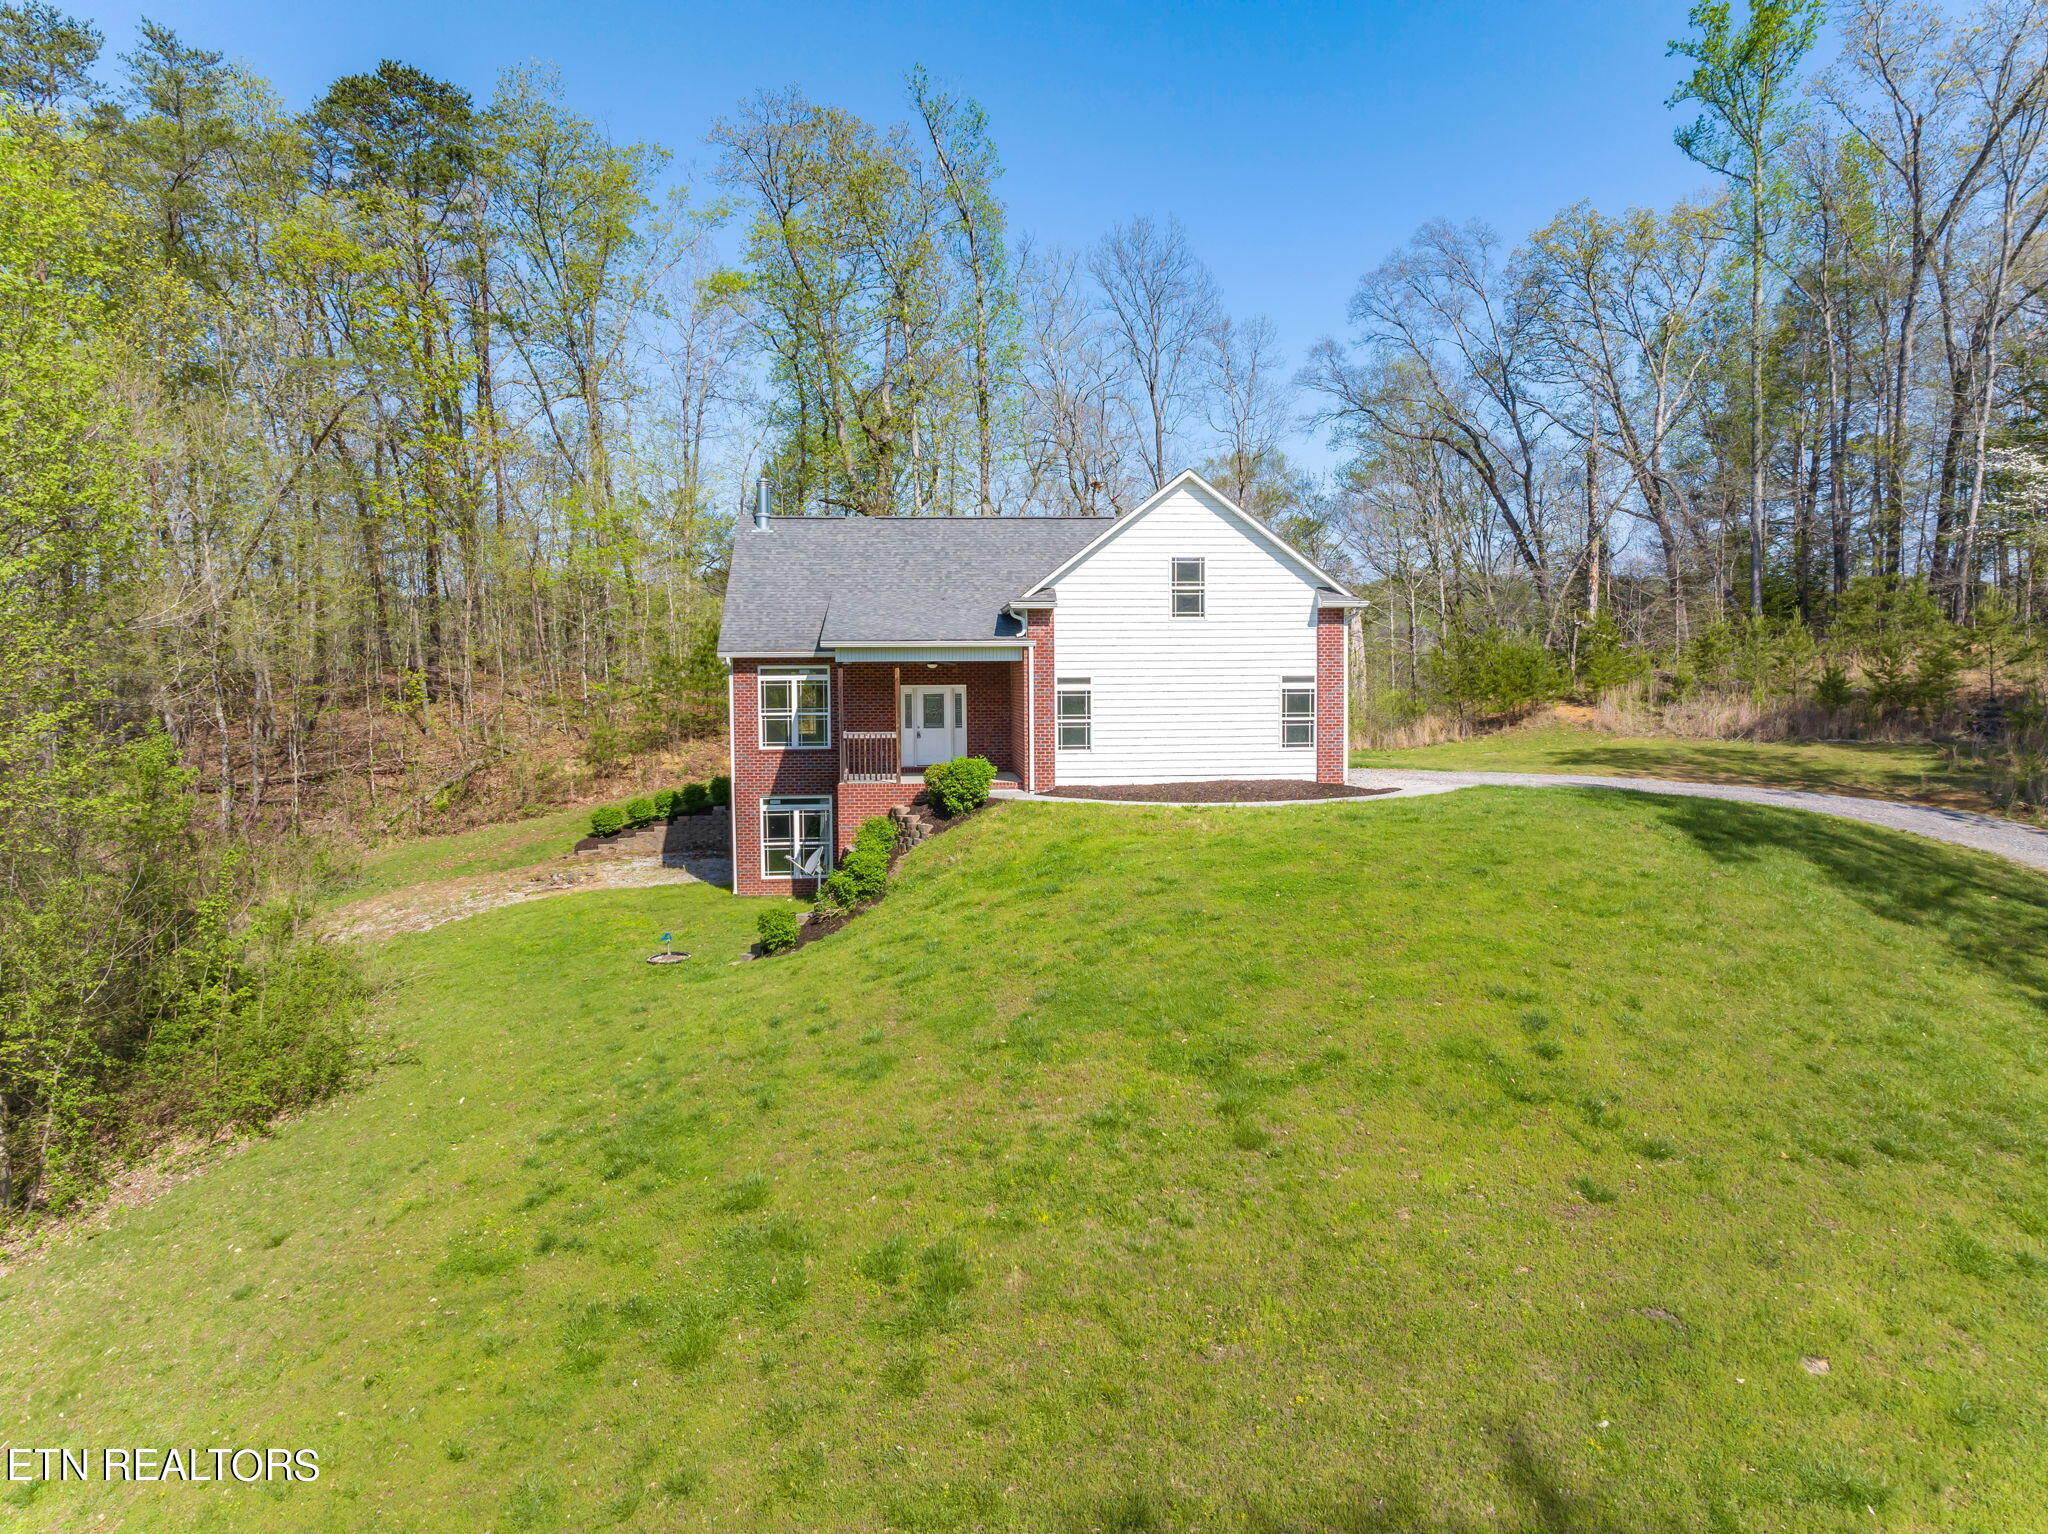 51-web-or-mls-517 E Brushy Valley Dr-52